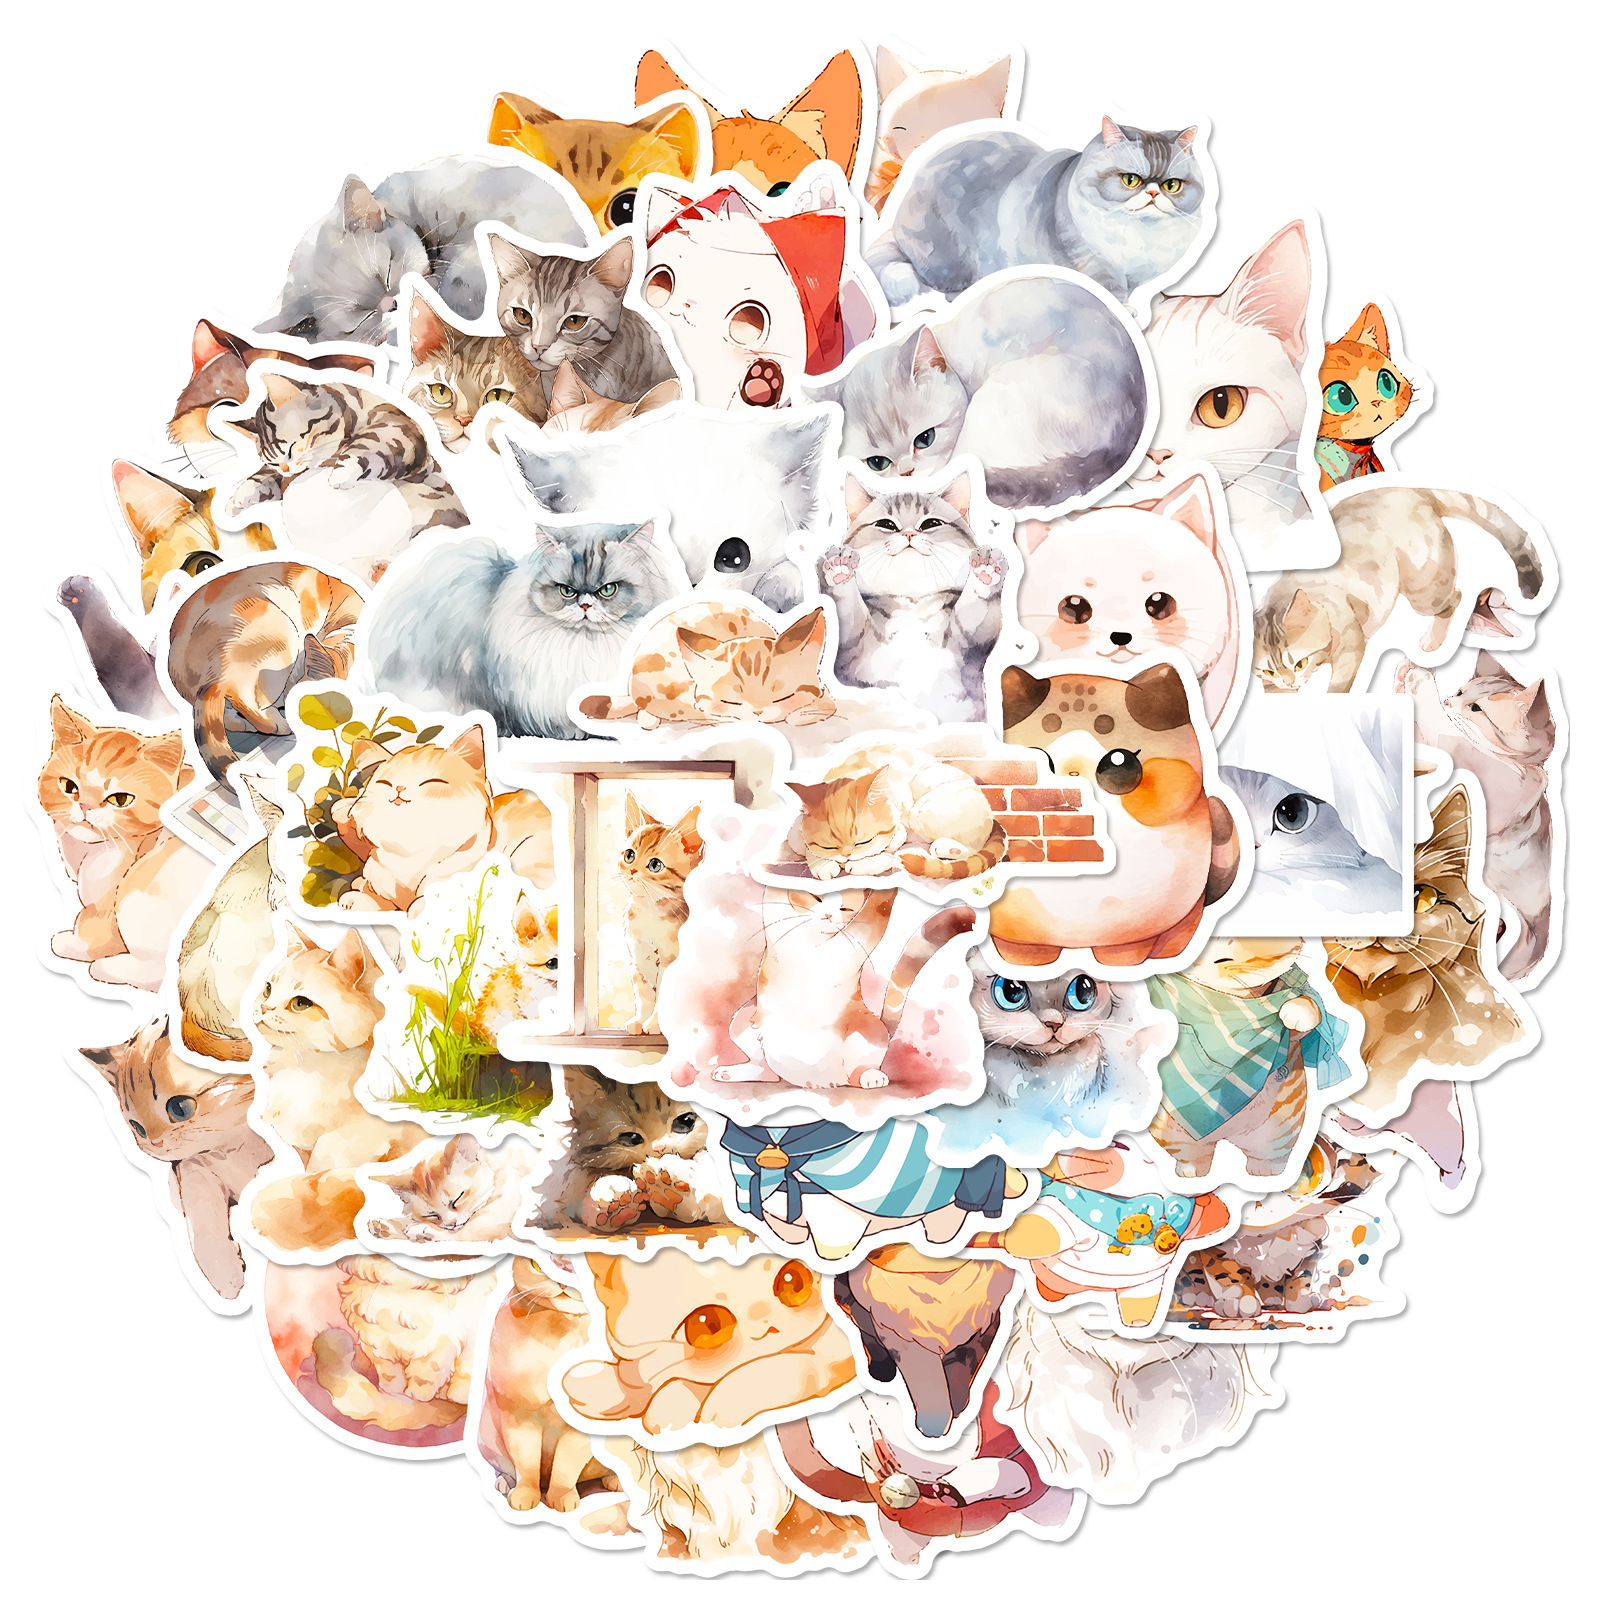  Warriors Cats Stickers 52PCS Kawaii Funny Cats Toy Stickers for  Book Graffiti Waterproof Vinyl Decals for Kids Adults Teens for Birthday  Party Supplies Decoration Favors for Water Bottles Laptop : Electronics